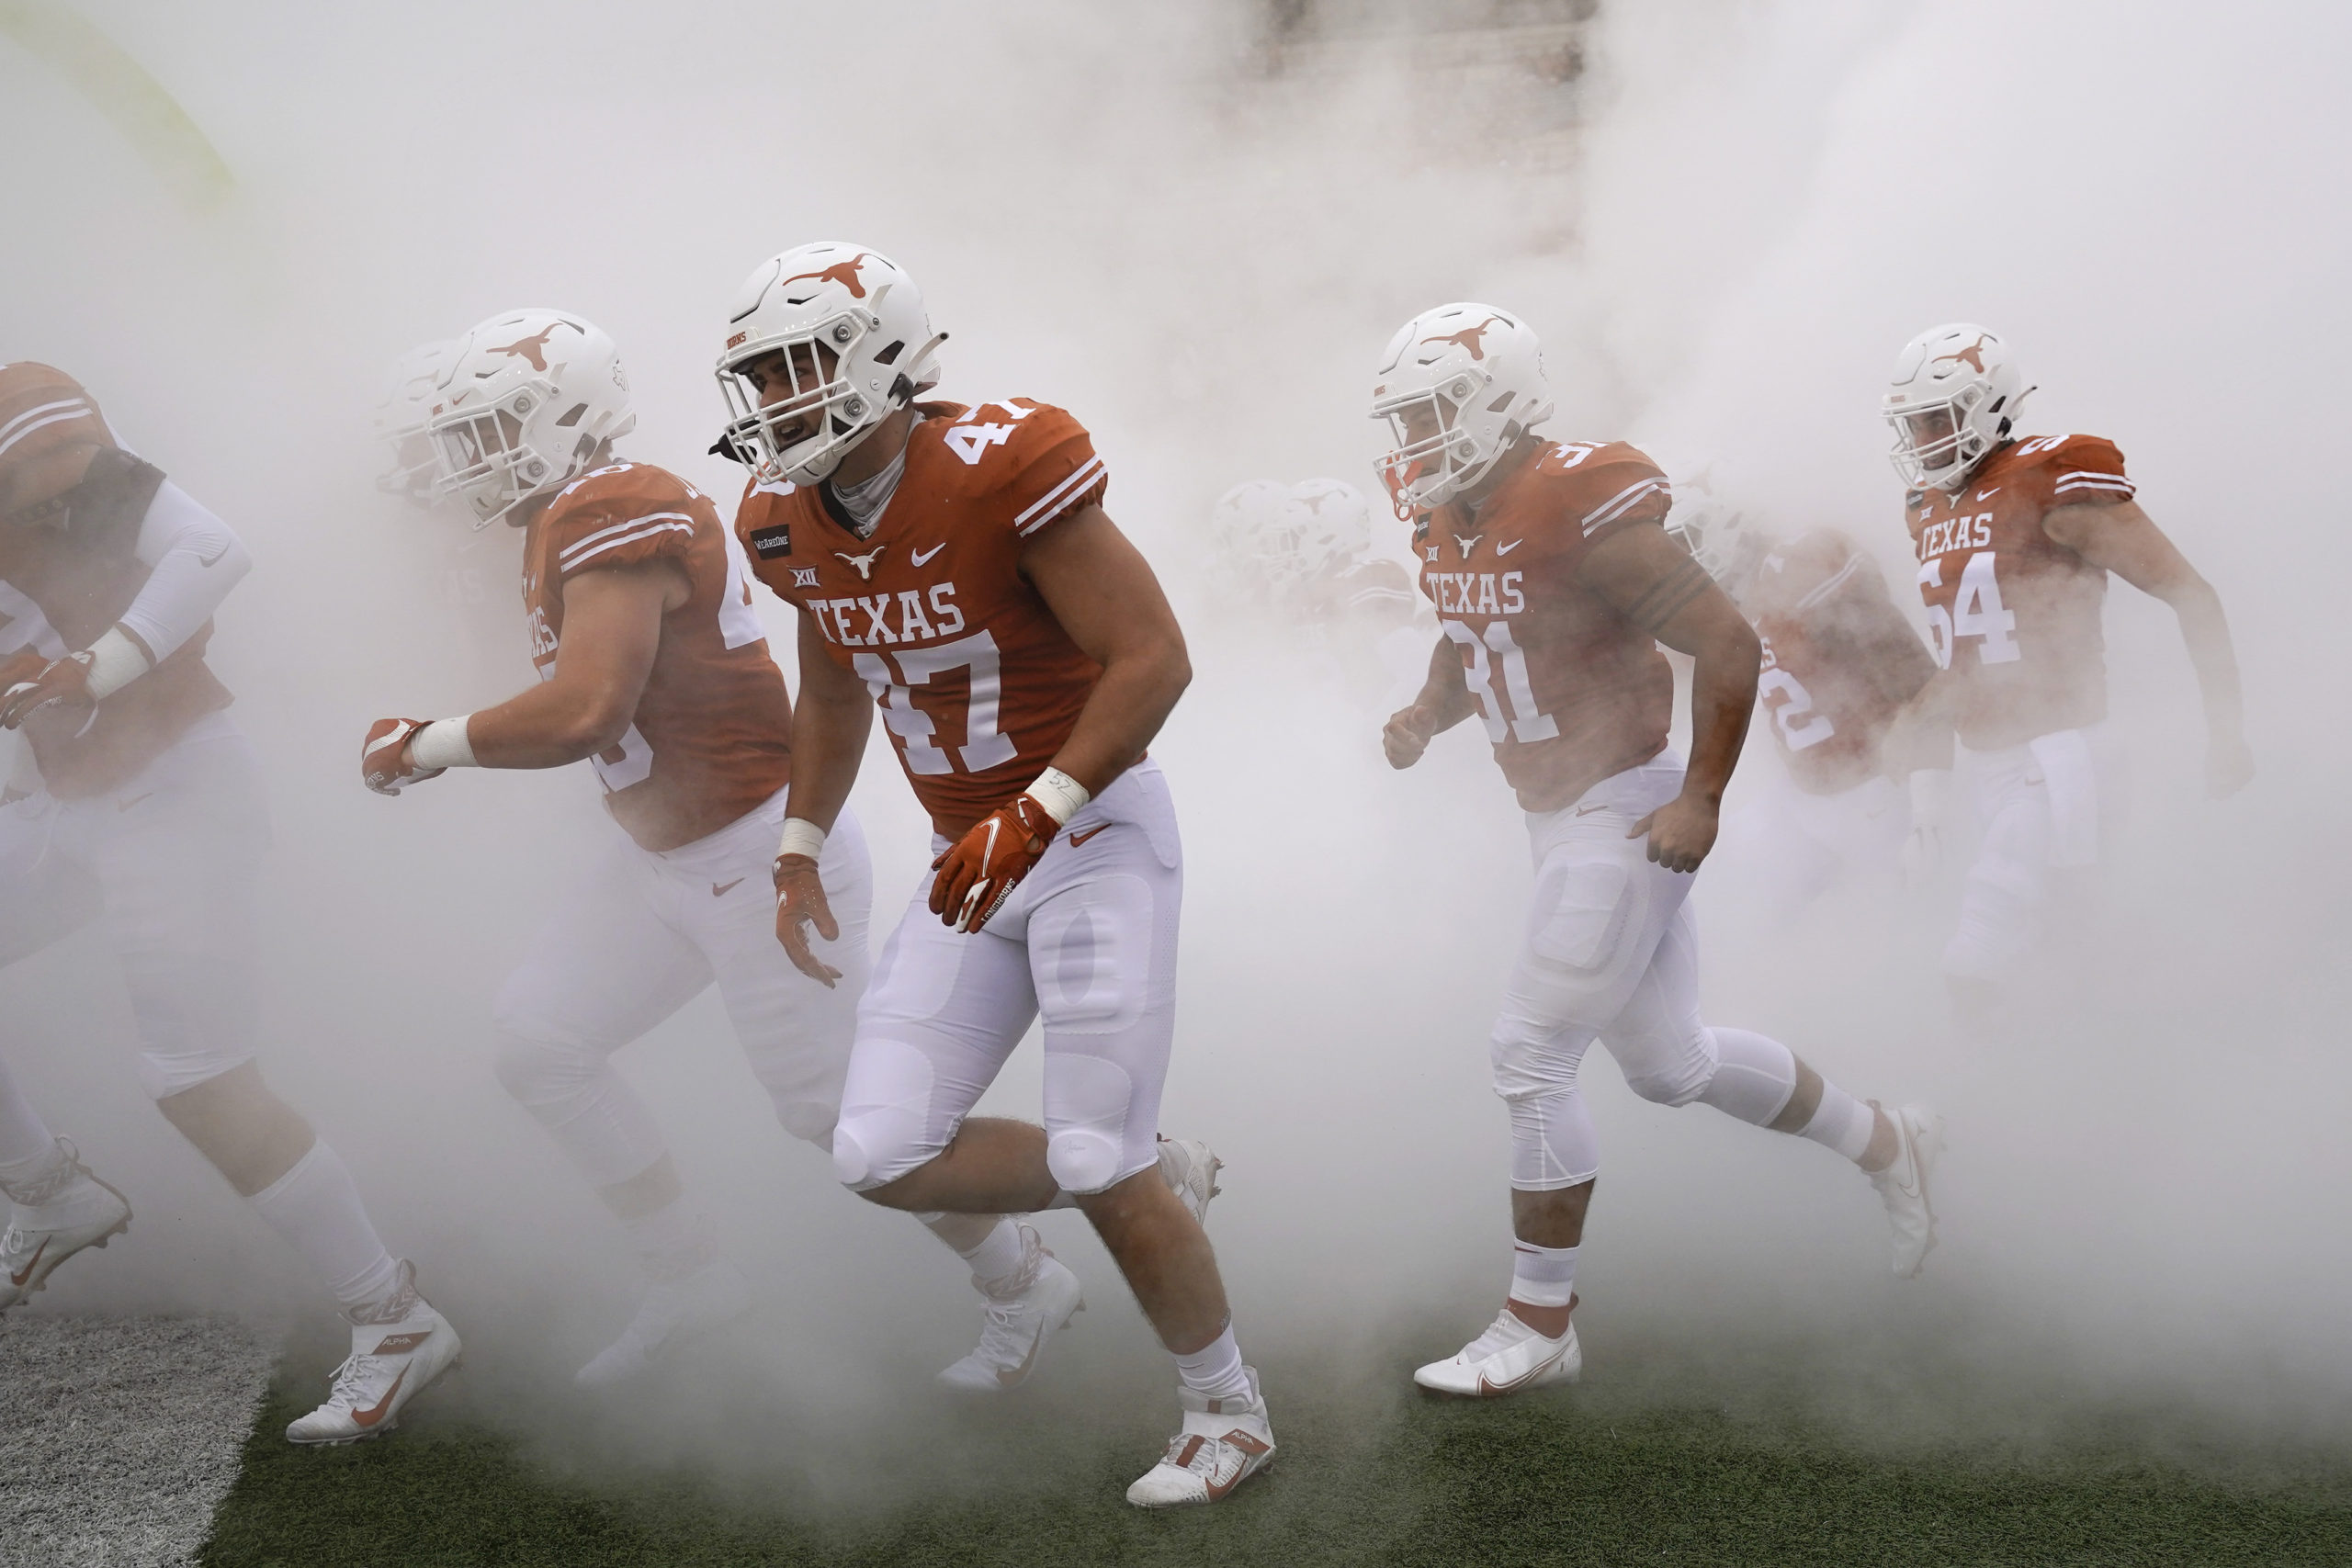 Big 12 decision makers set to meet about OU, Texas reports ...